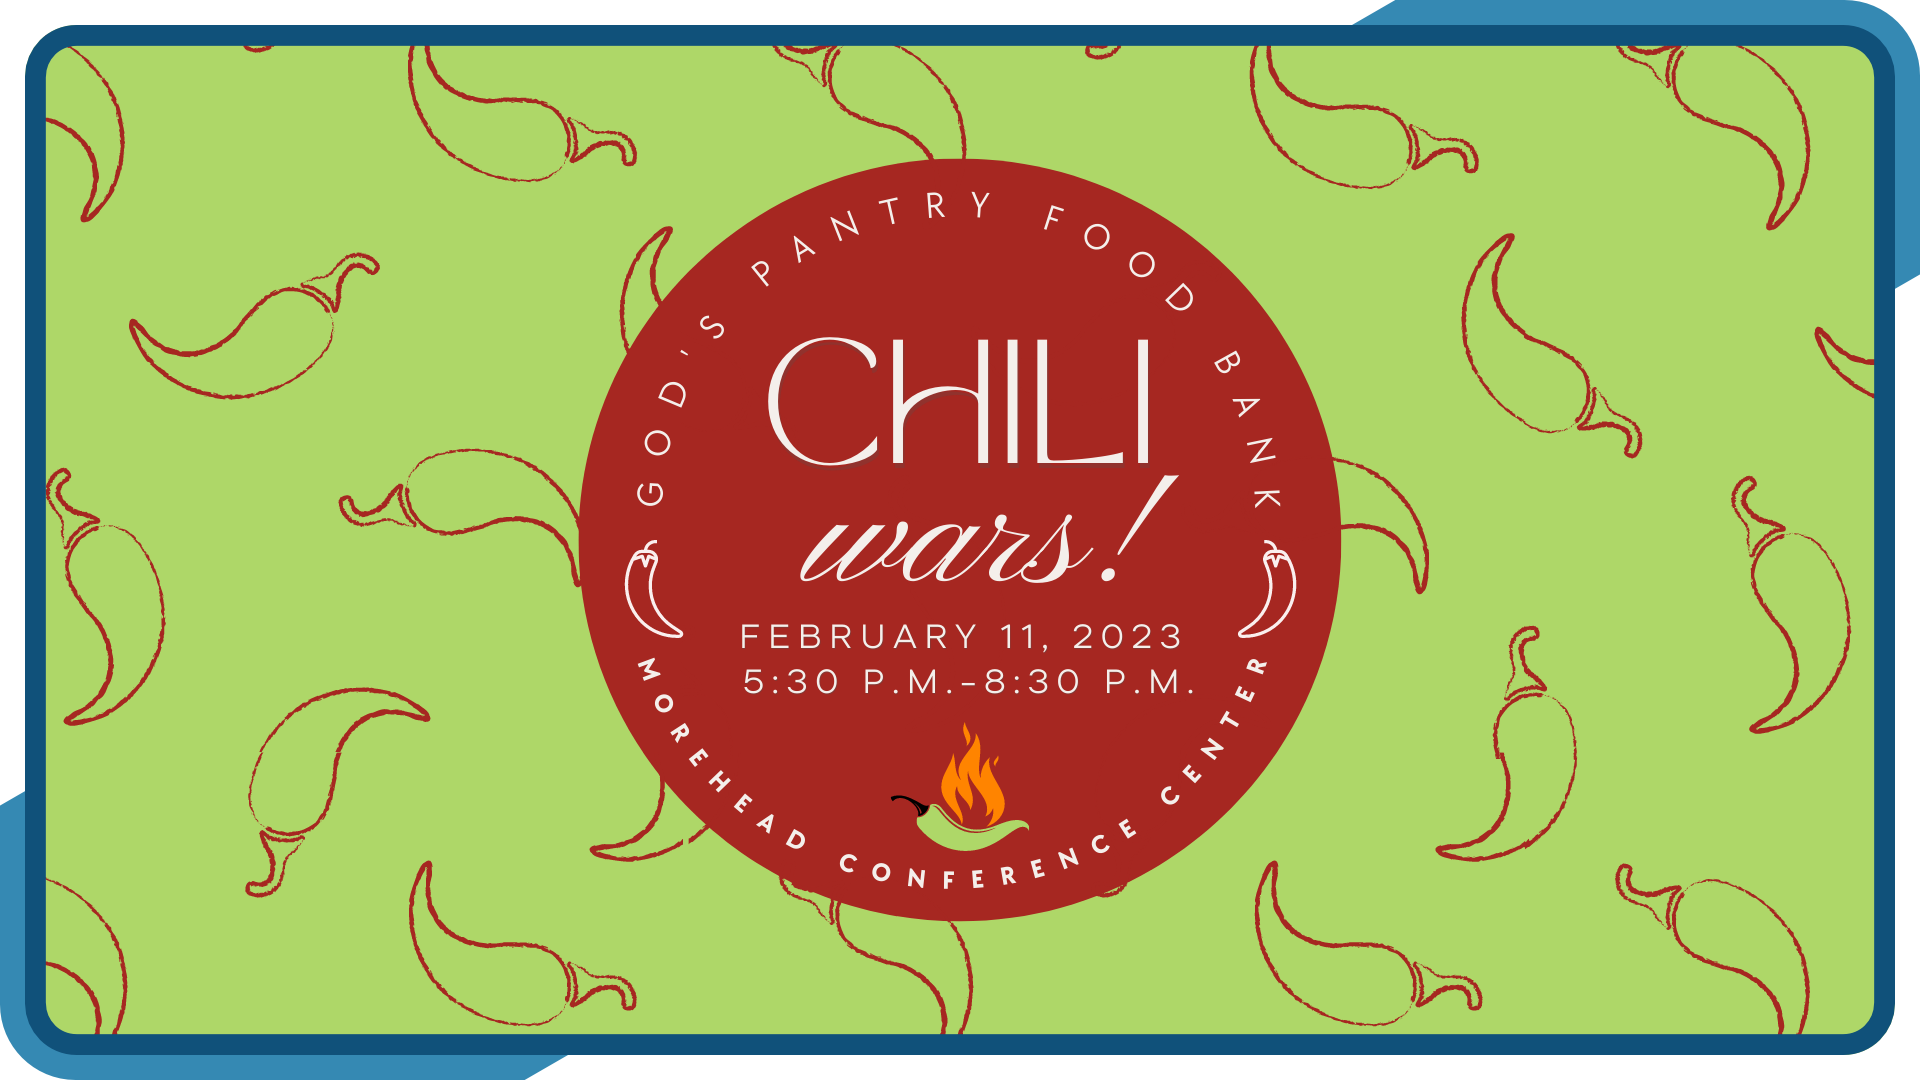 Chili Wars, February 11th at 5:30pm, intended for all ages